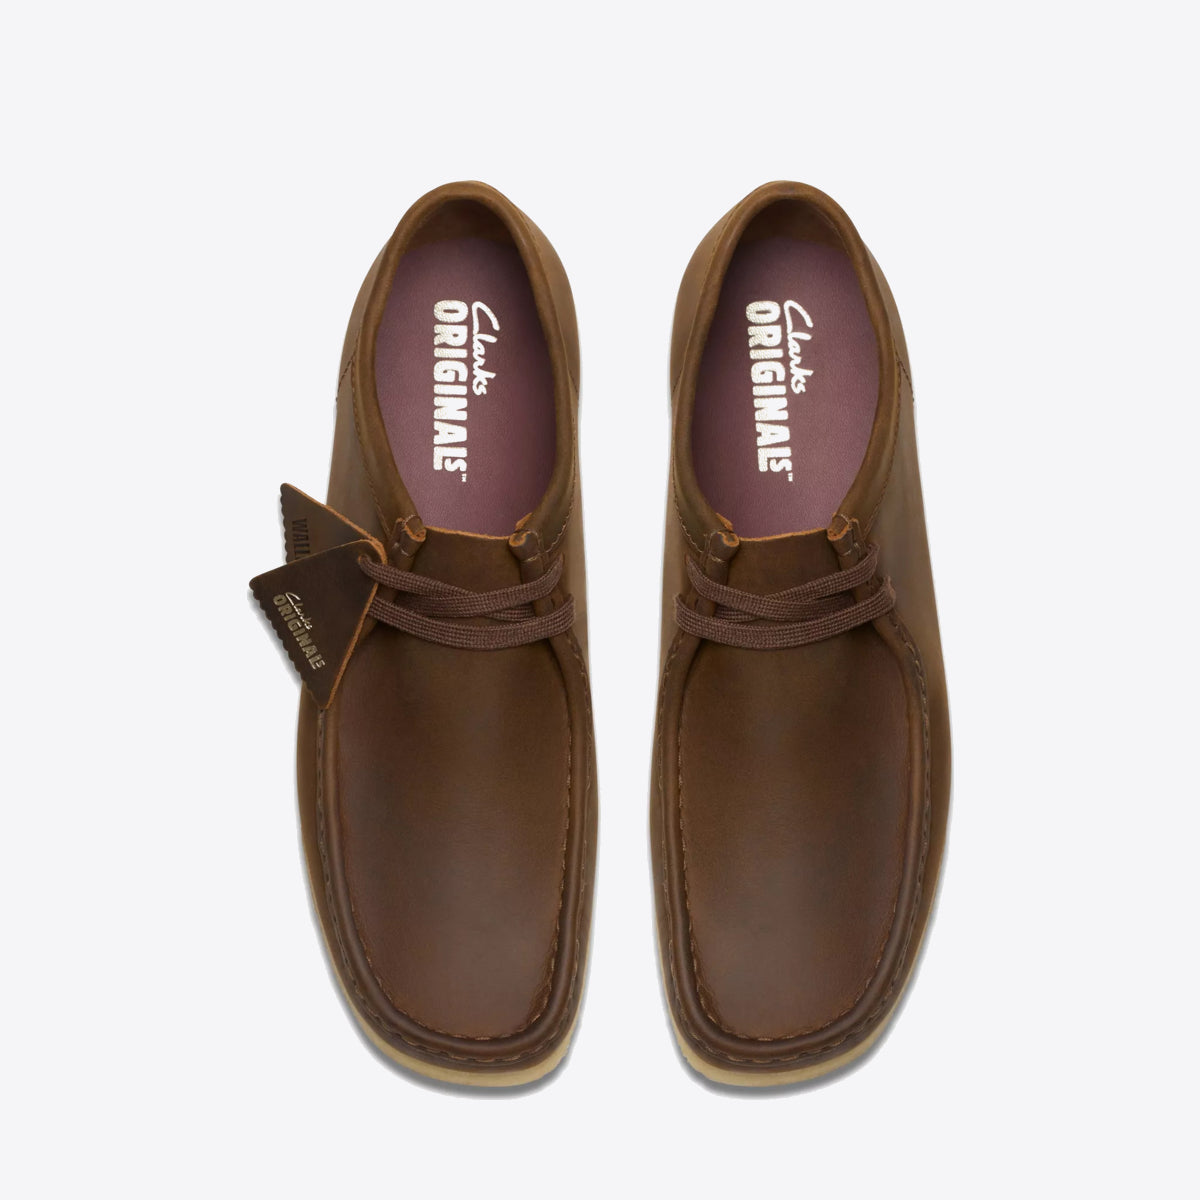 CLARKS Wallabee Shoe Suede Beeswax - Image 6